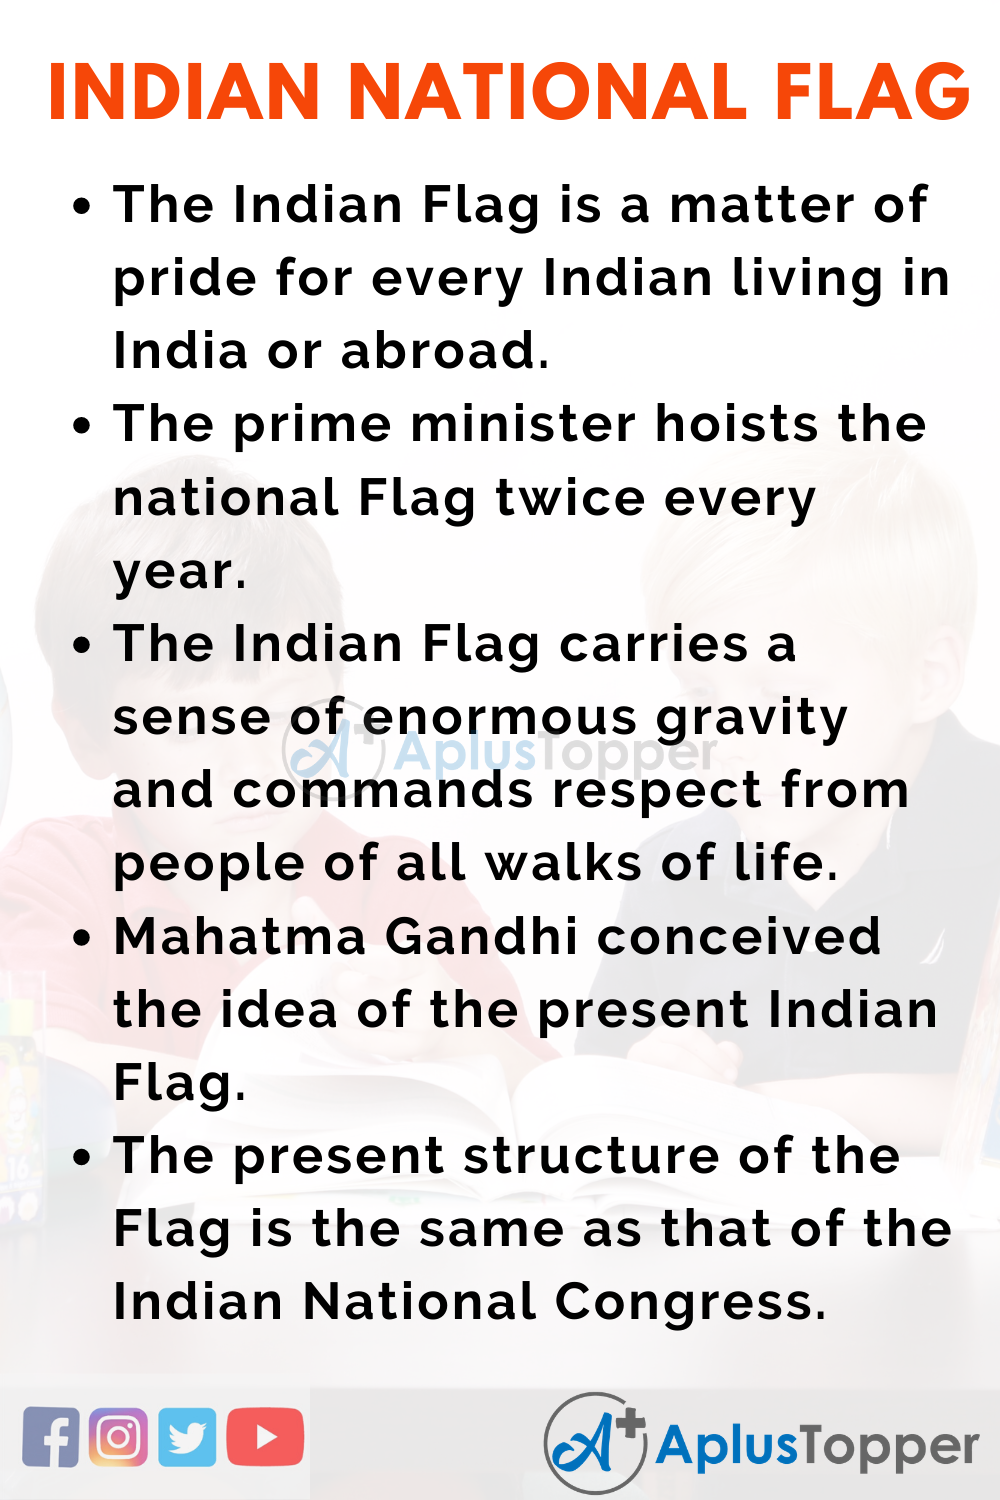 essay on importance of national flag